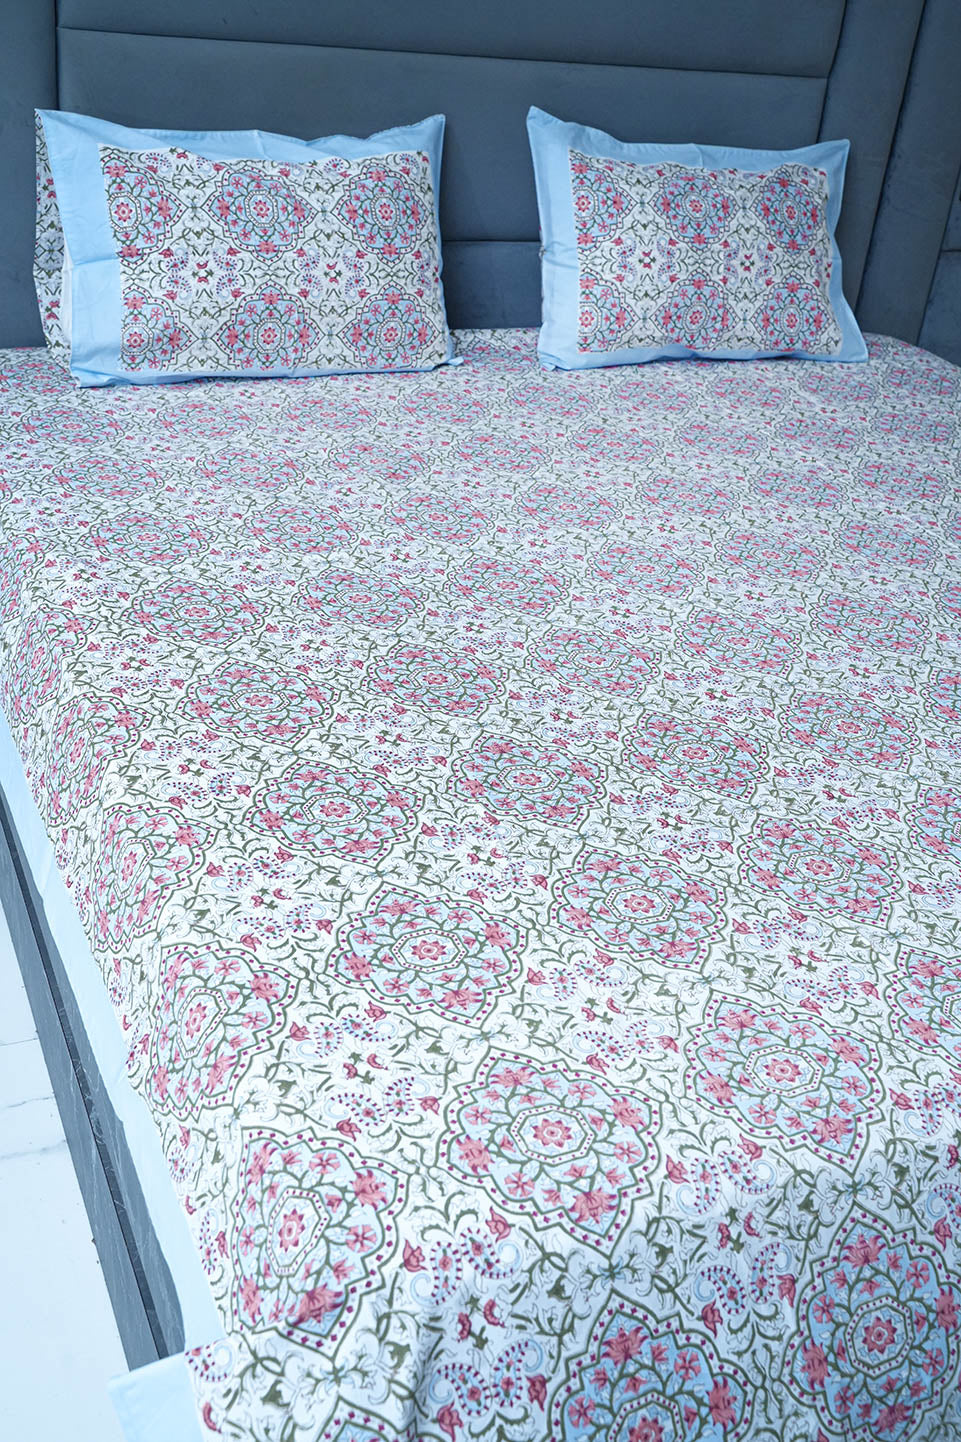 DIYA HAND BLOCK PRINTED BEDSHEET WITH TWO REVERSIBLE PILLOW COVERS